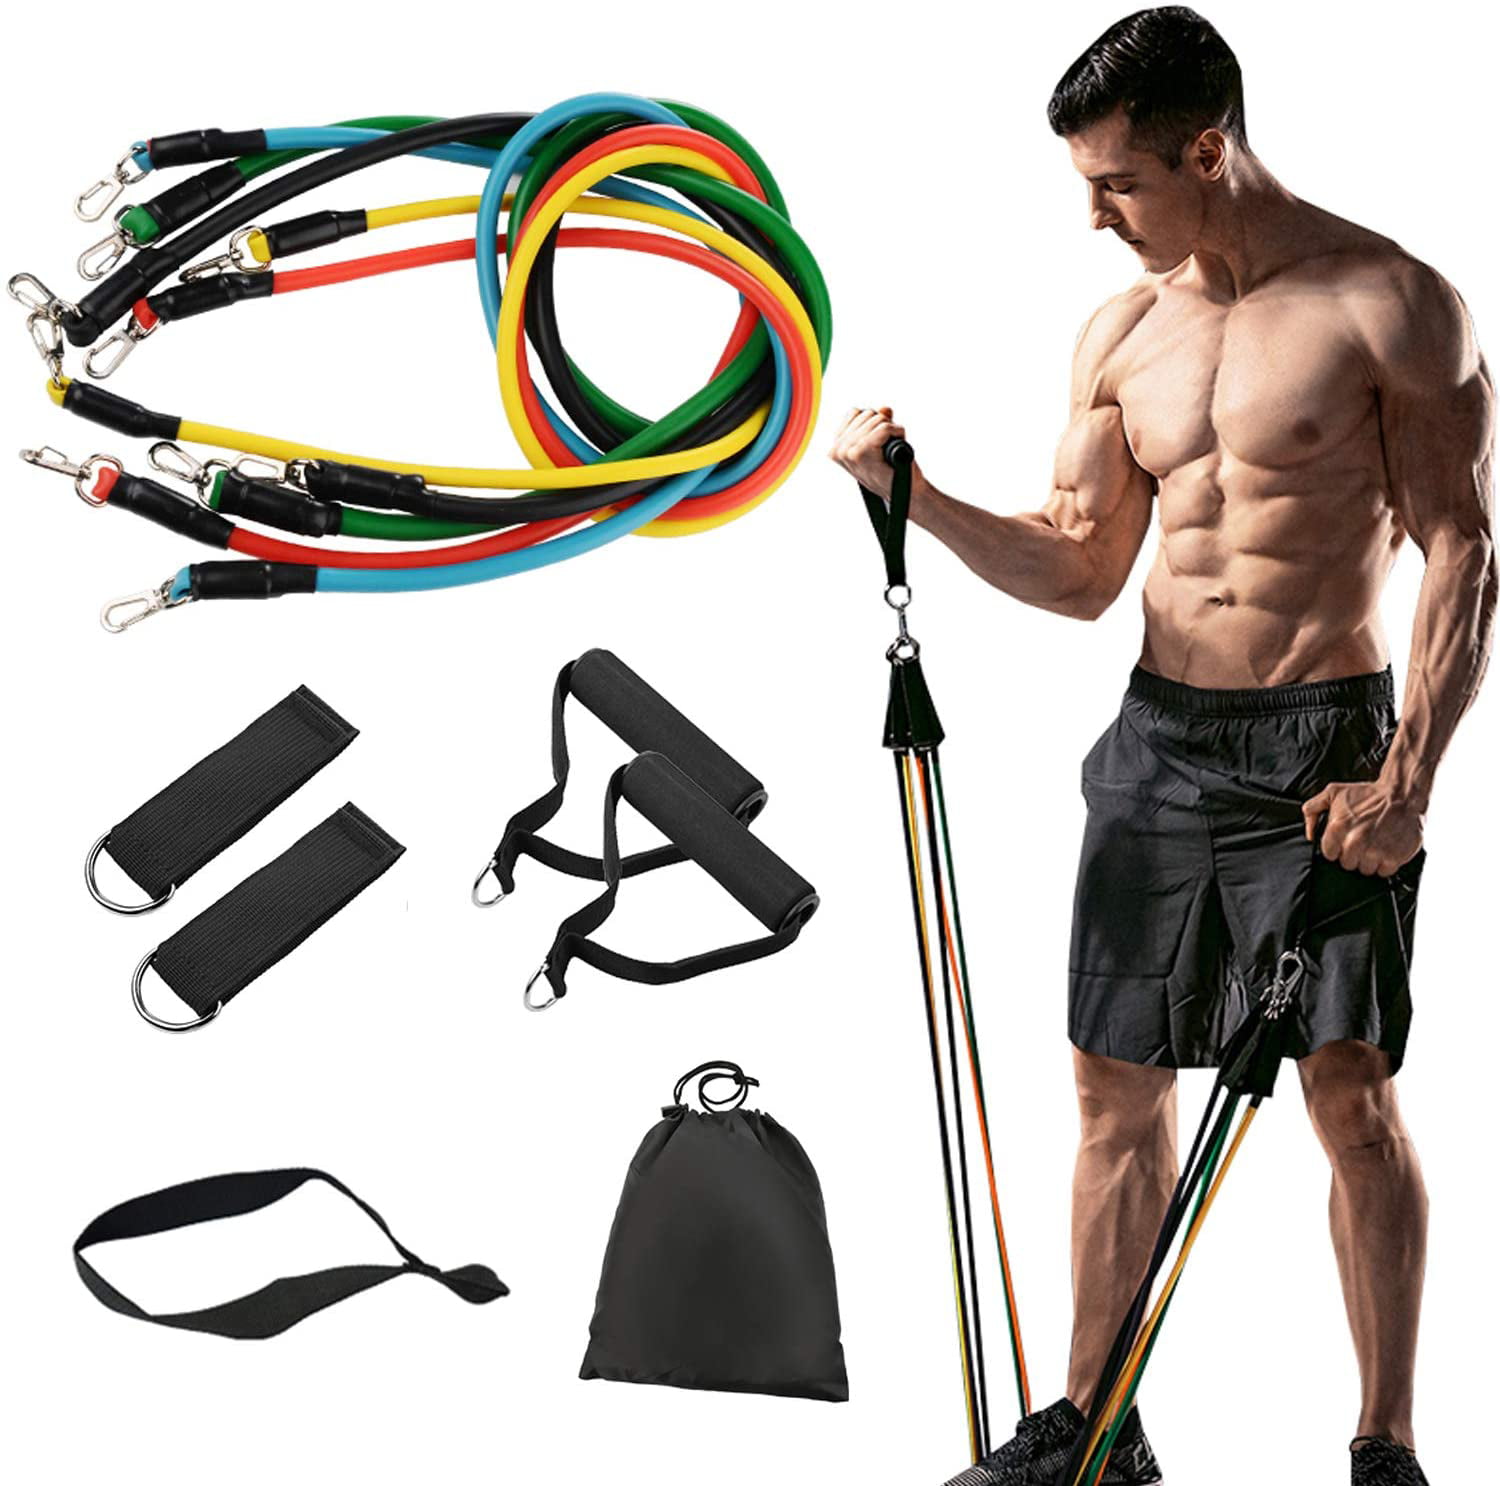 Gym Exercise Resistance Bands Set Yoga Fitness Workout Stretch Tubes 